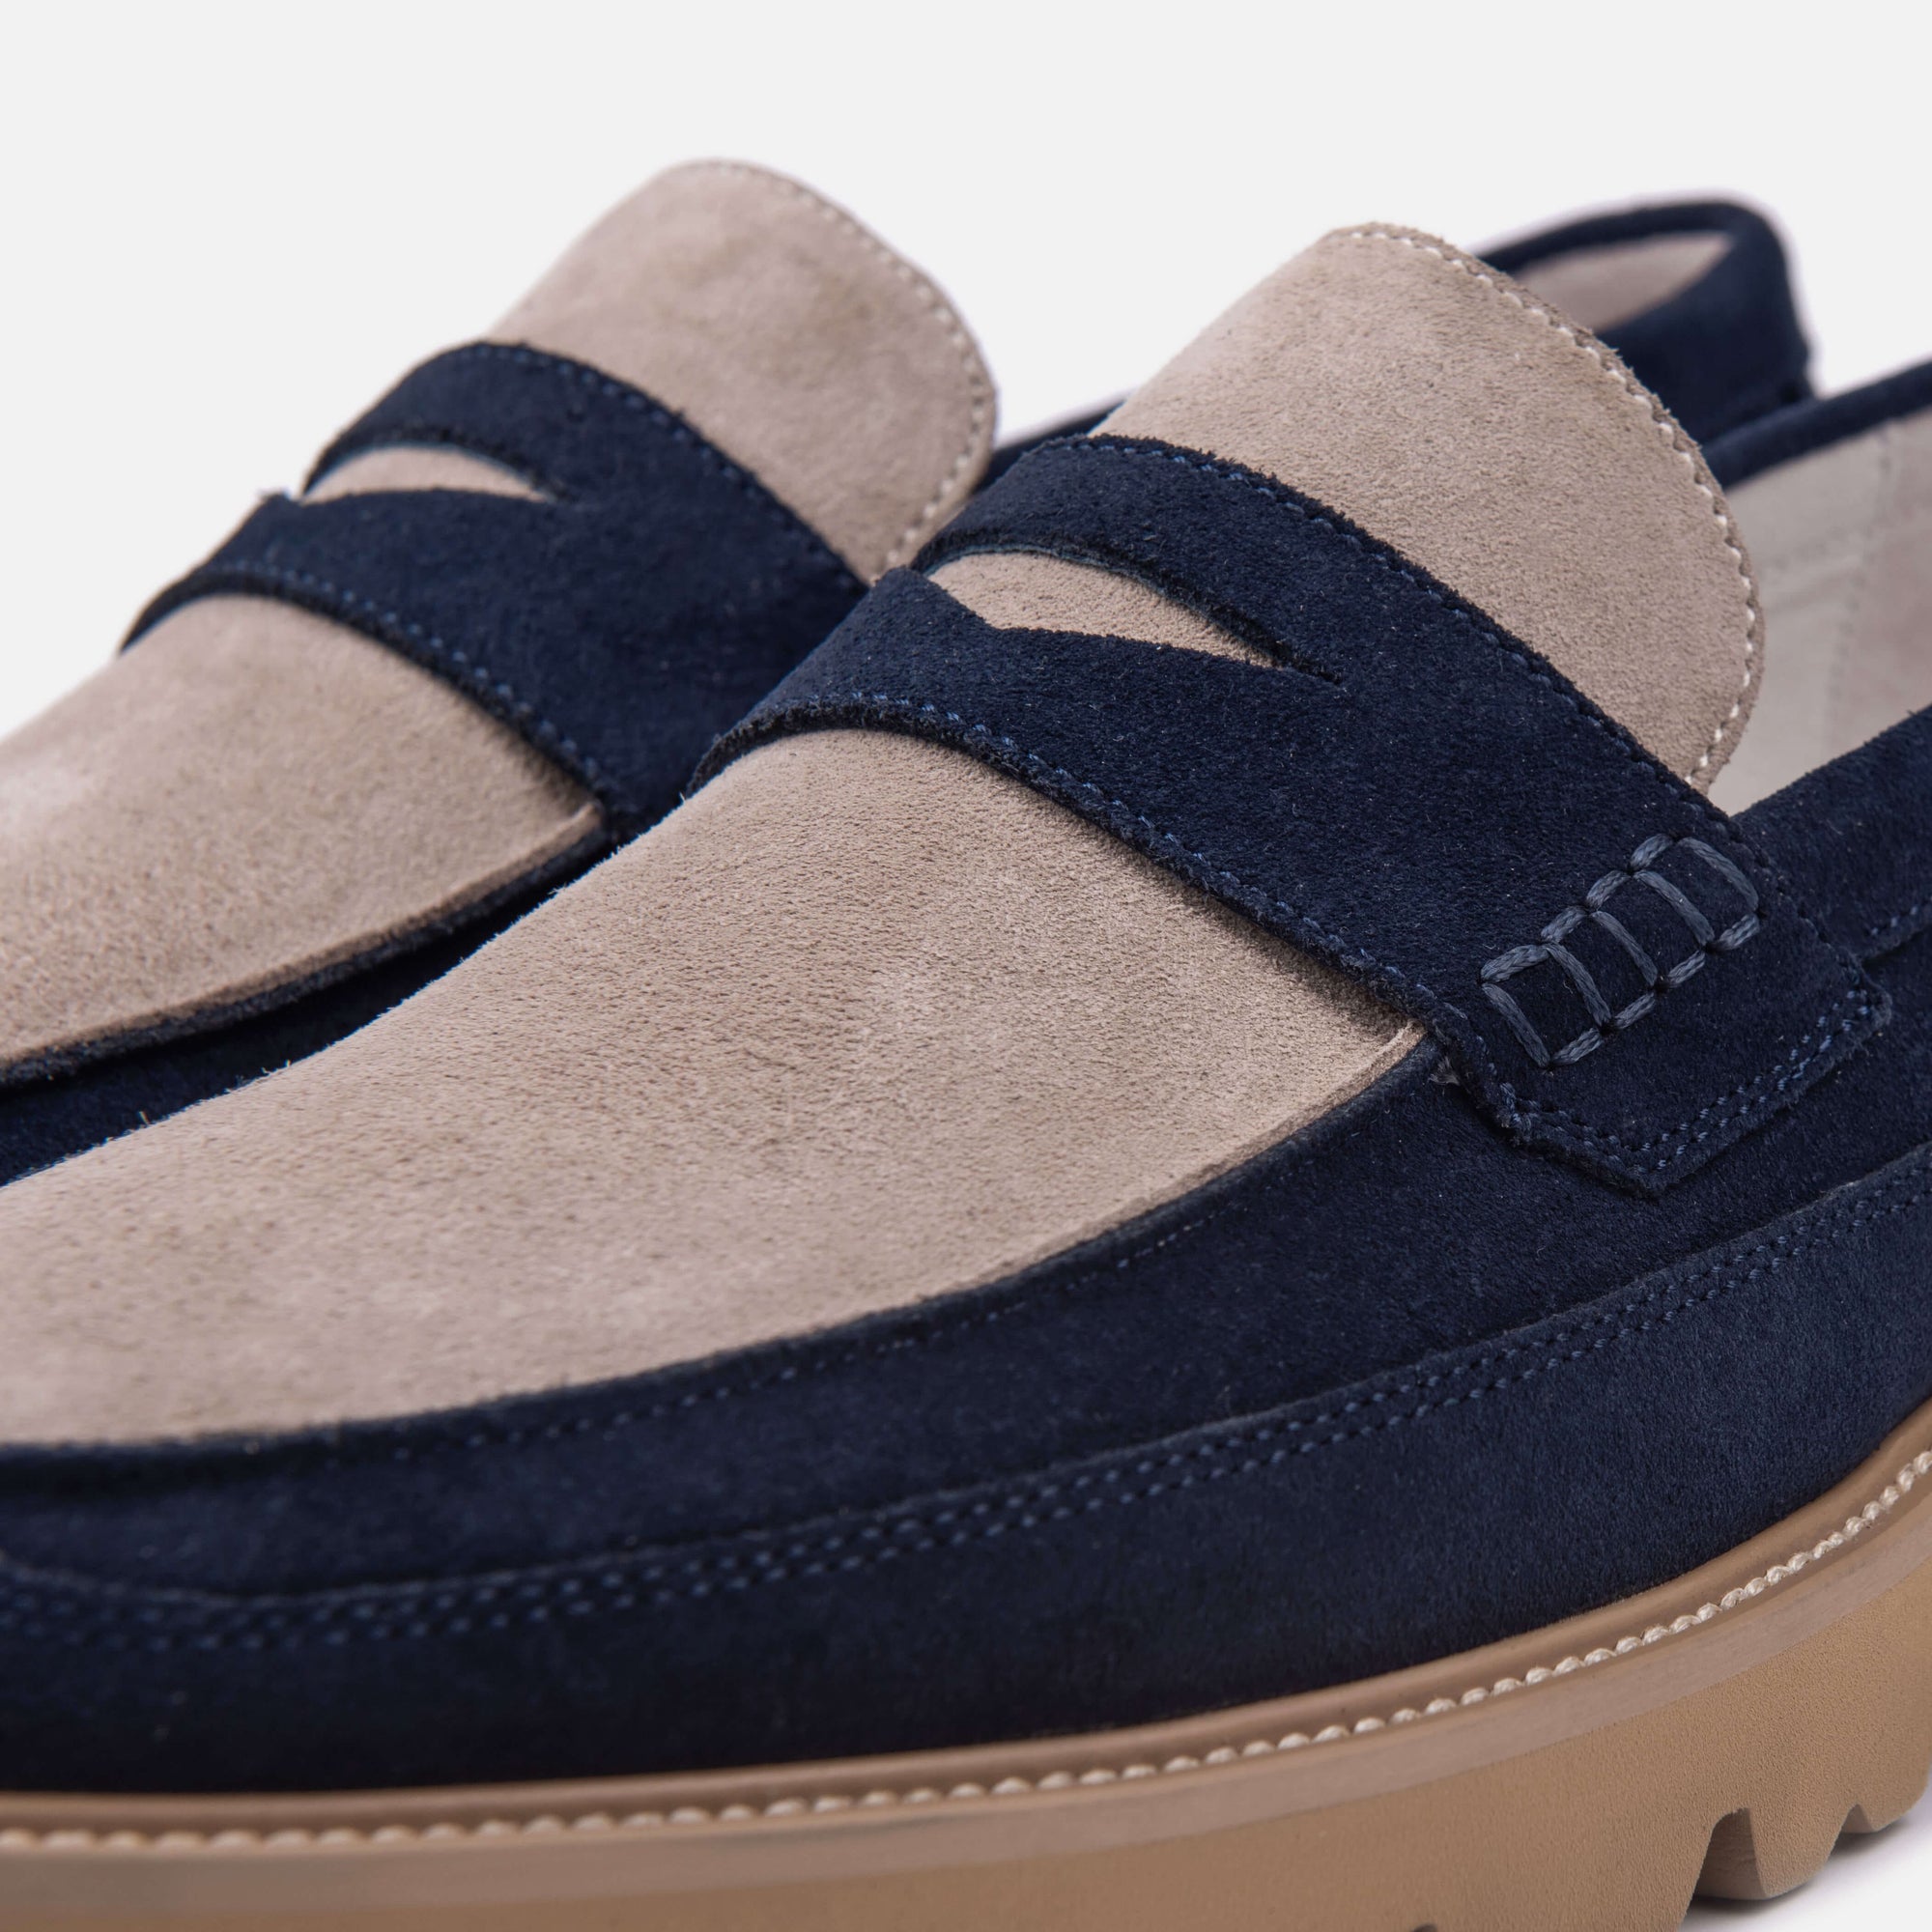 Lug Sole Loafer in Navy Suede